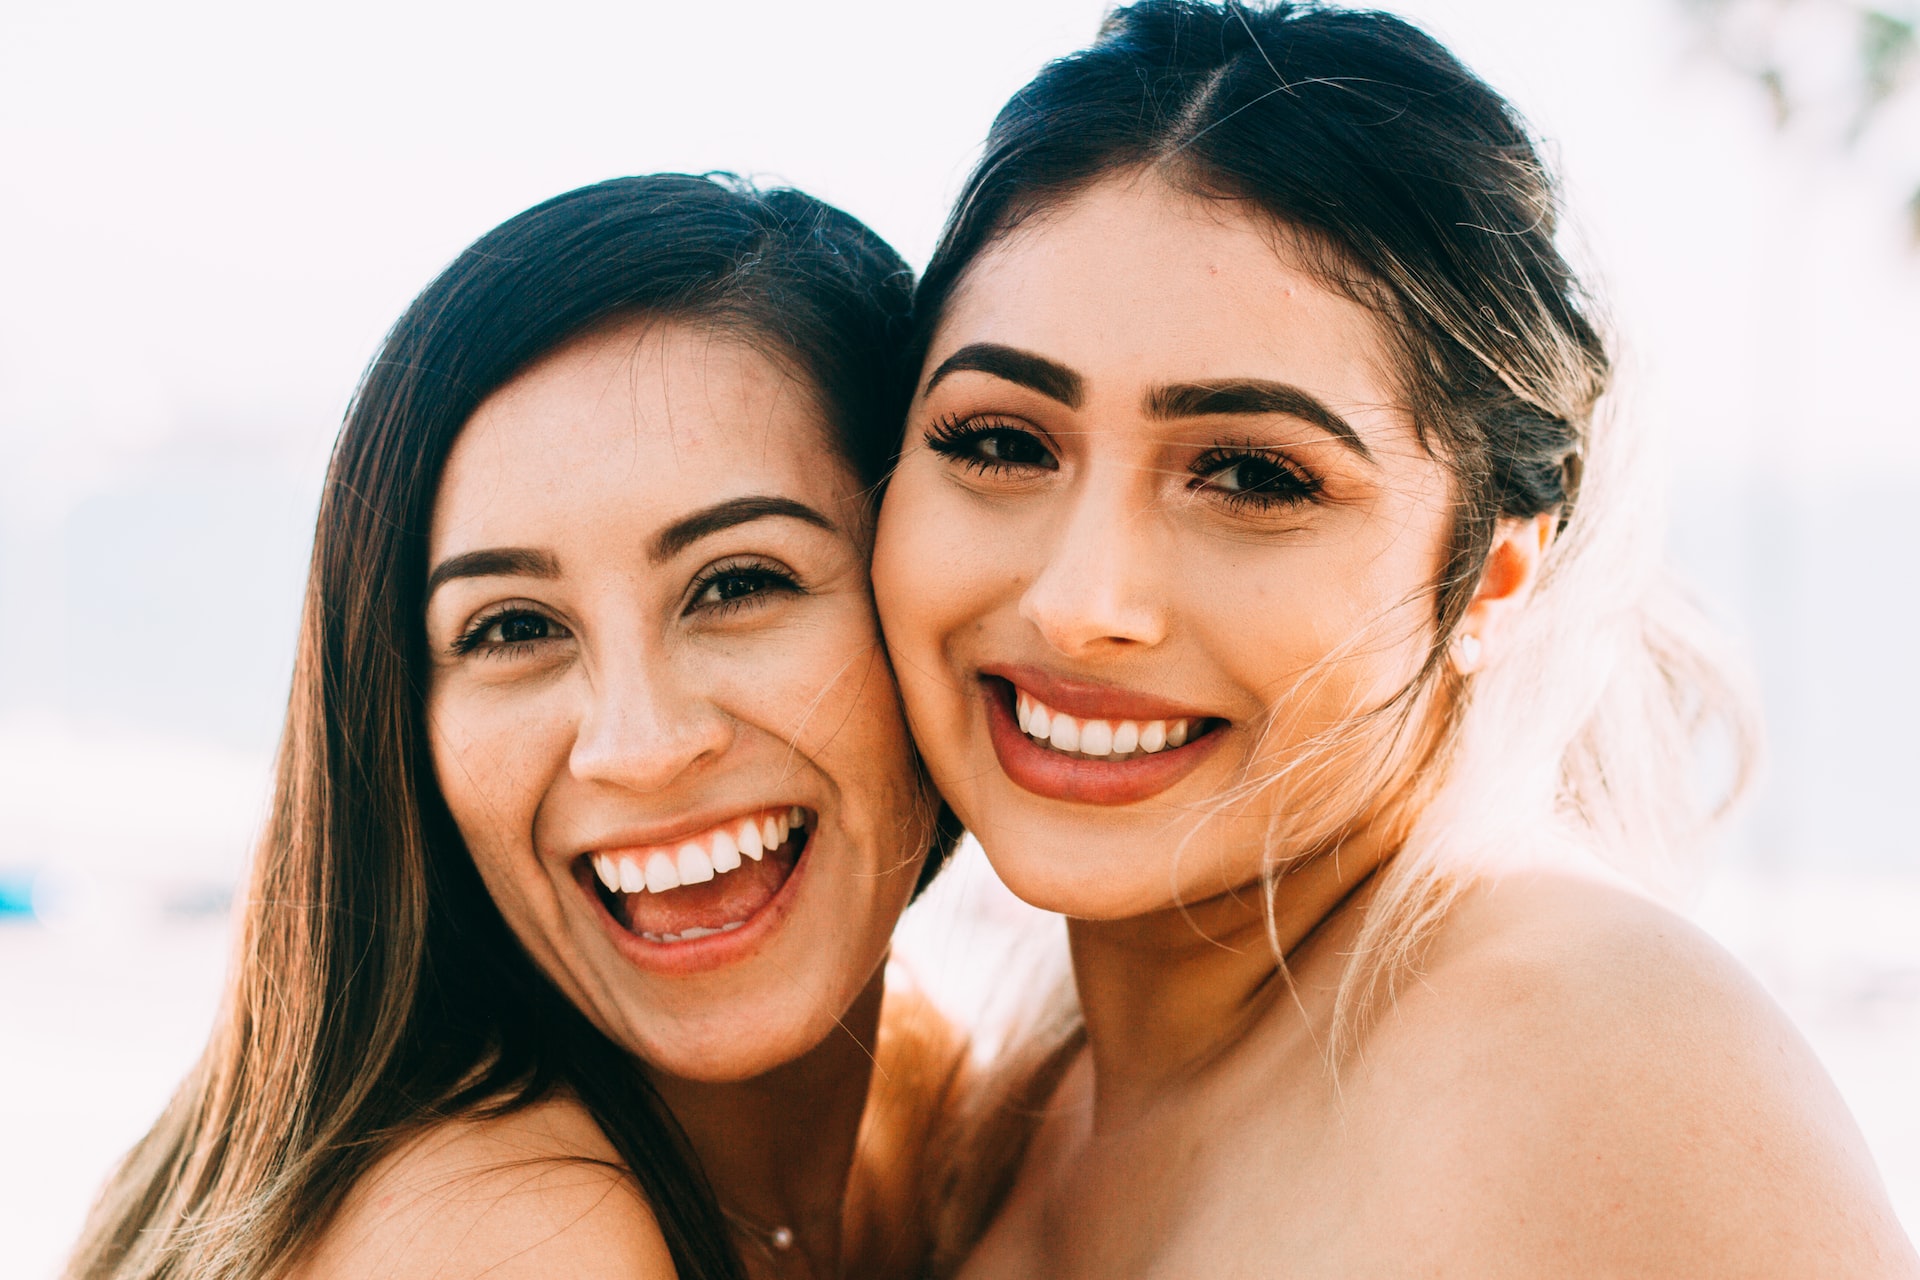 two smiling woman with white teeth - is baking soda safe to whiten teeth